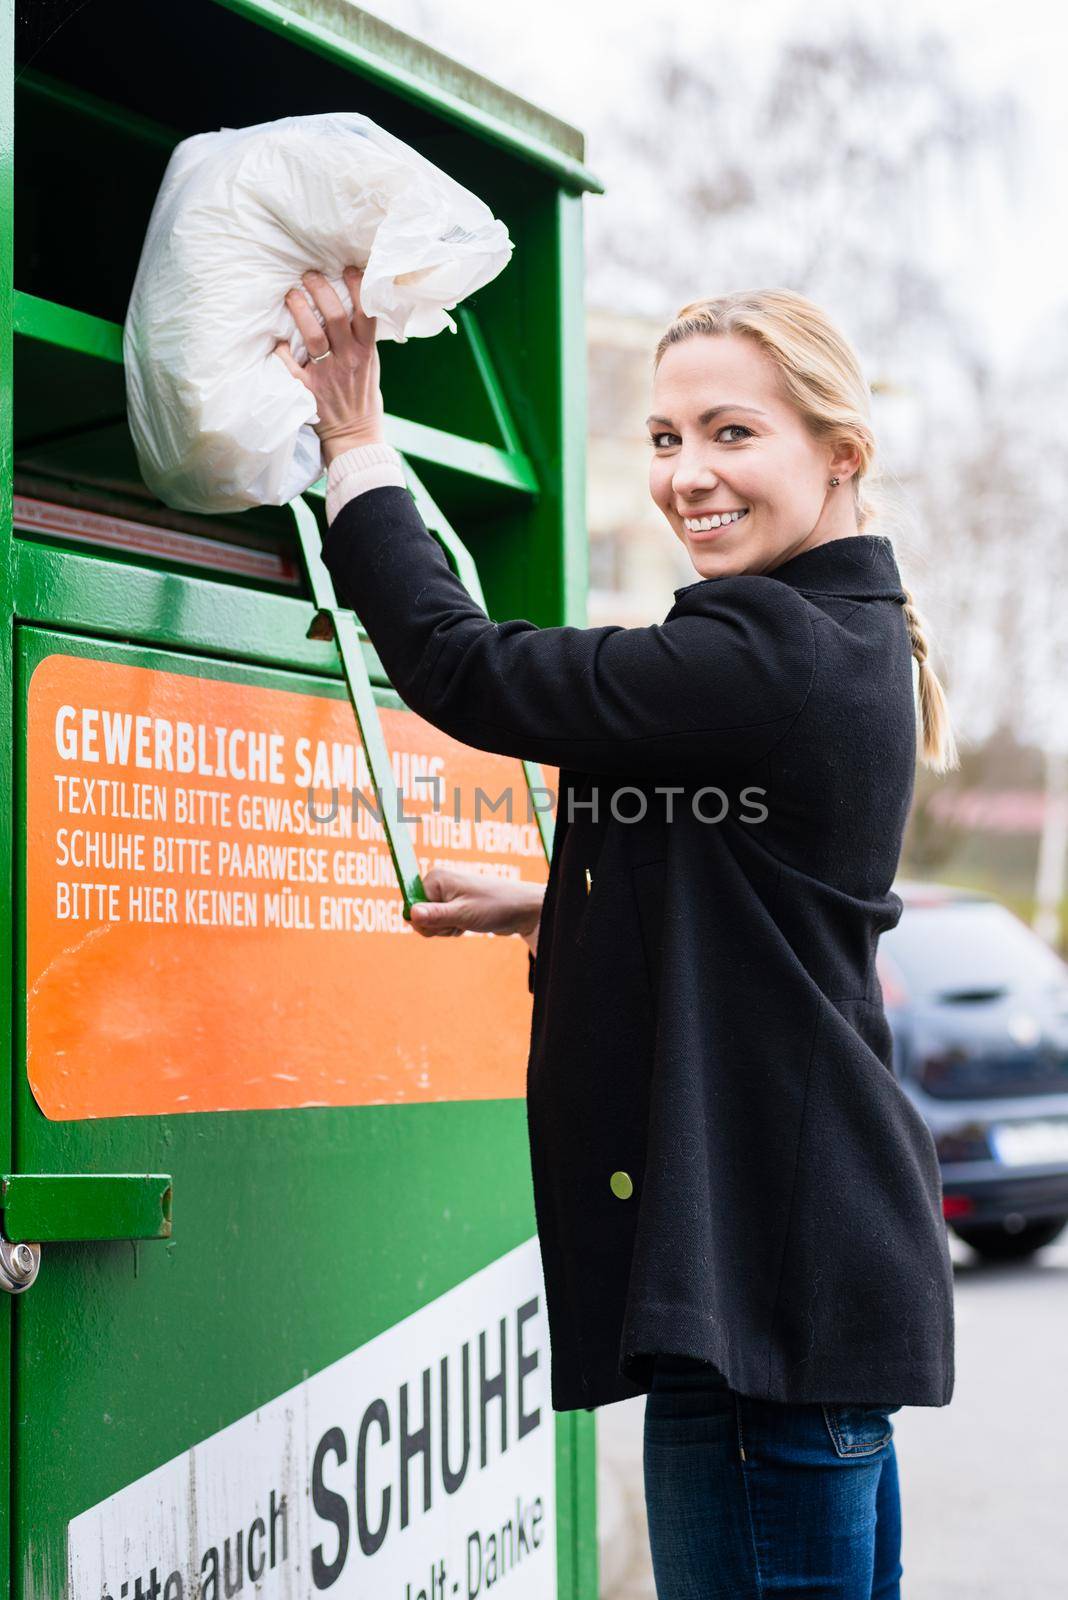 Young woman putting old or used clothes into donation bin